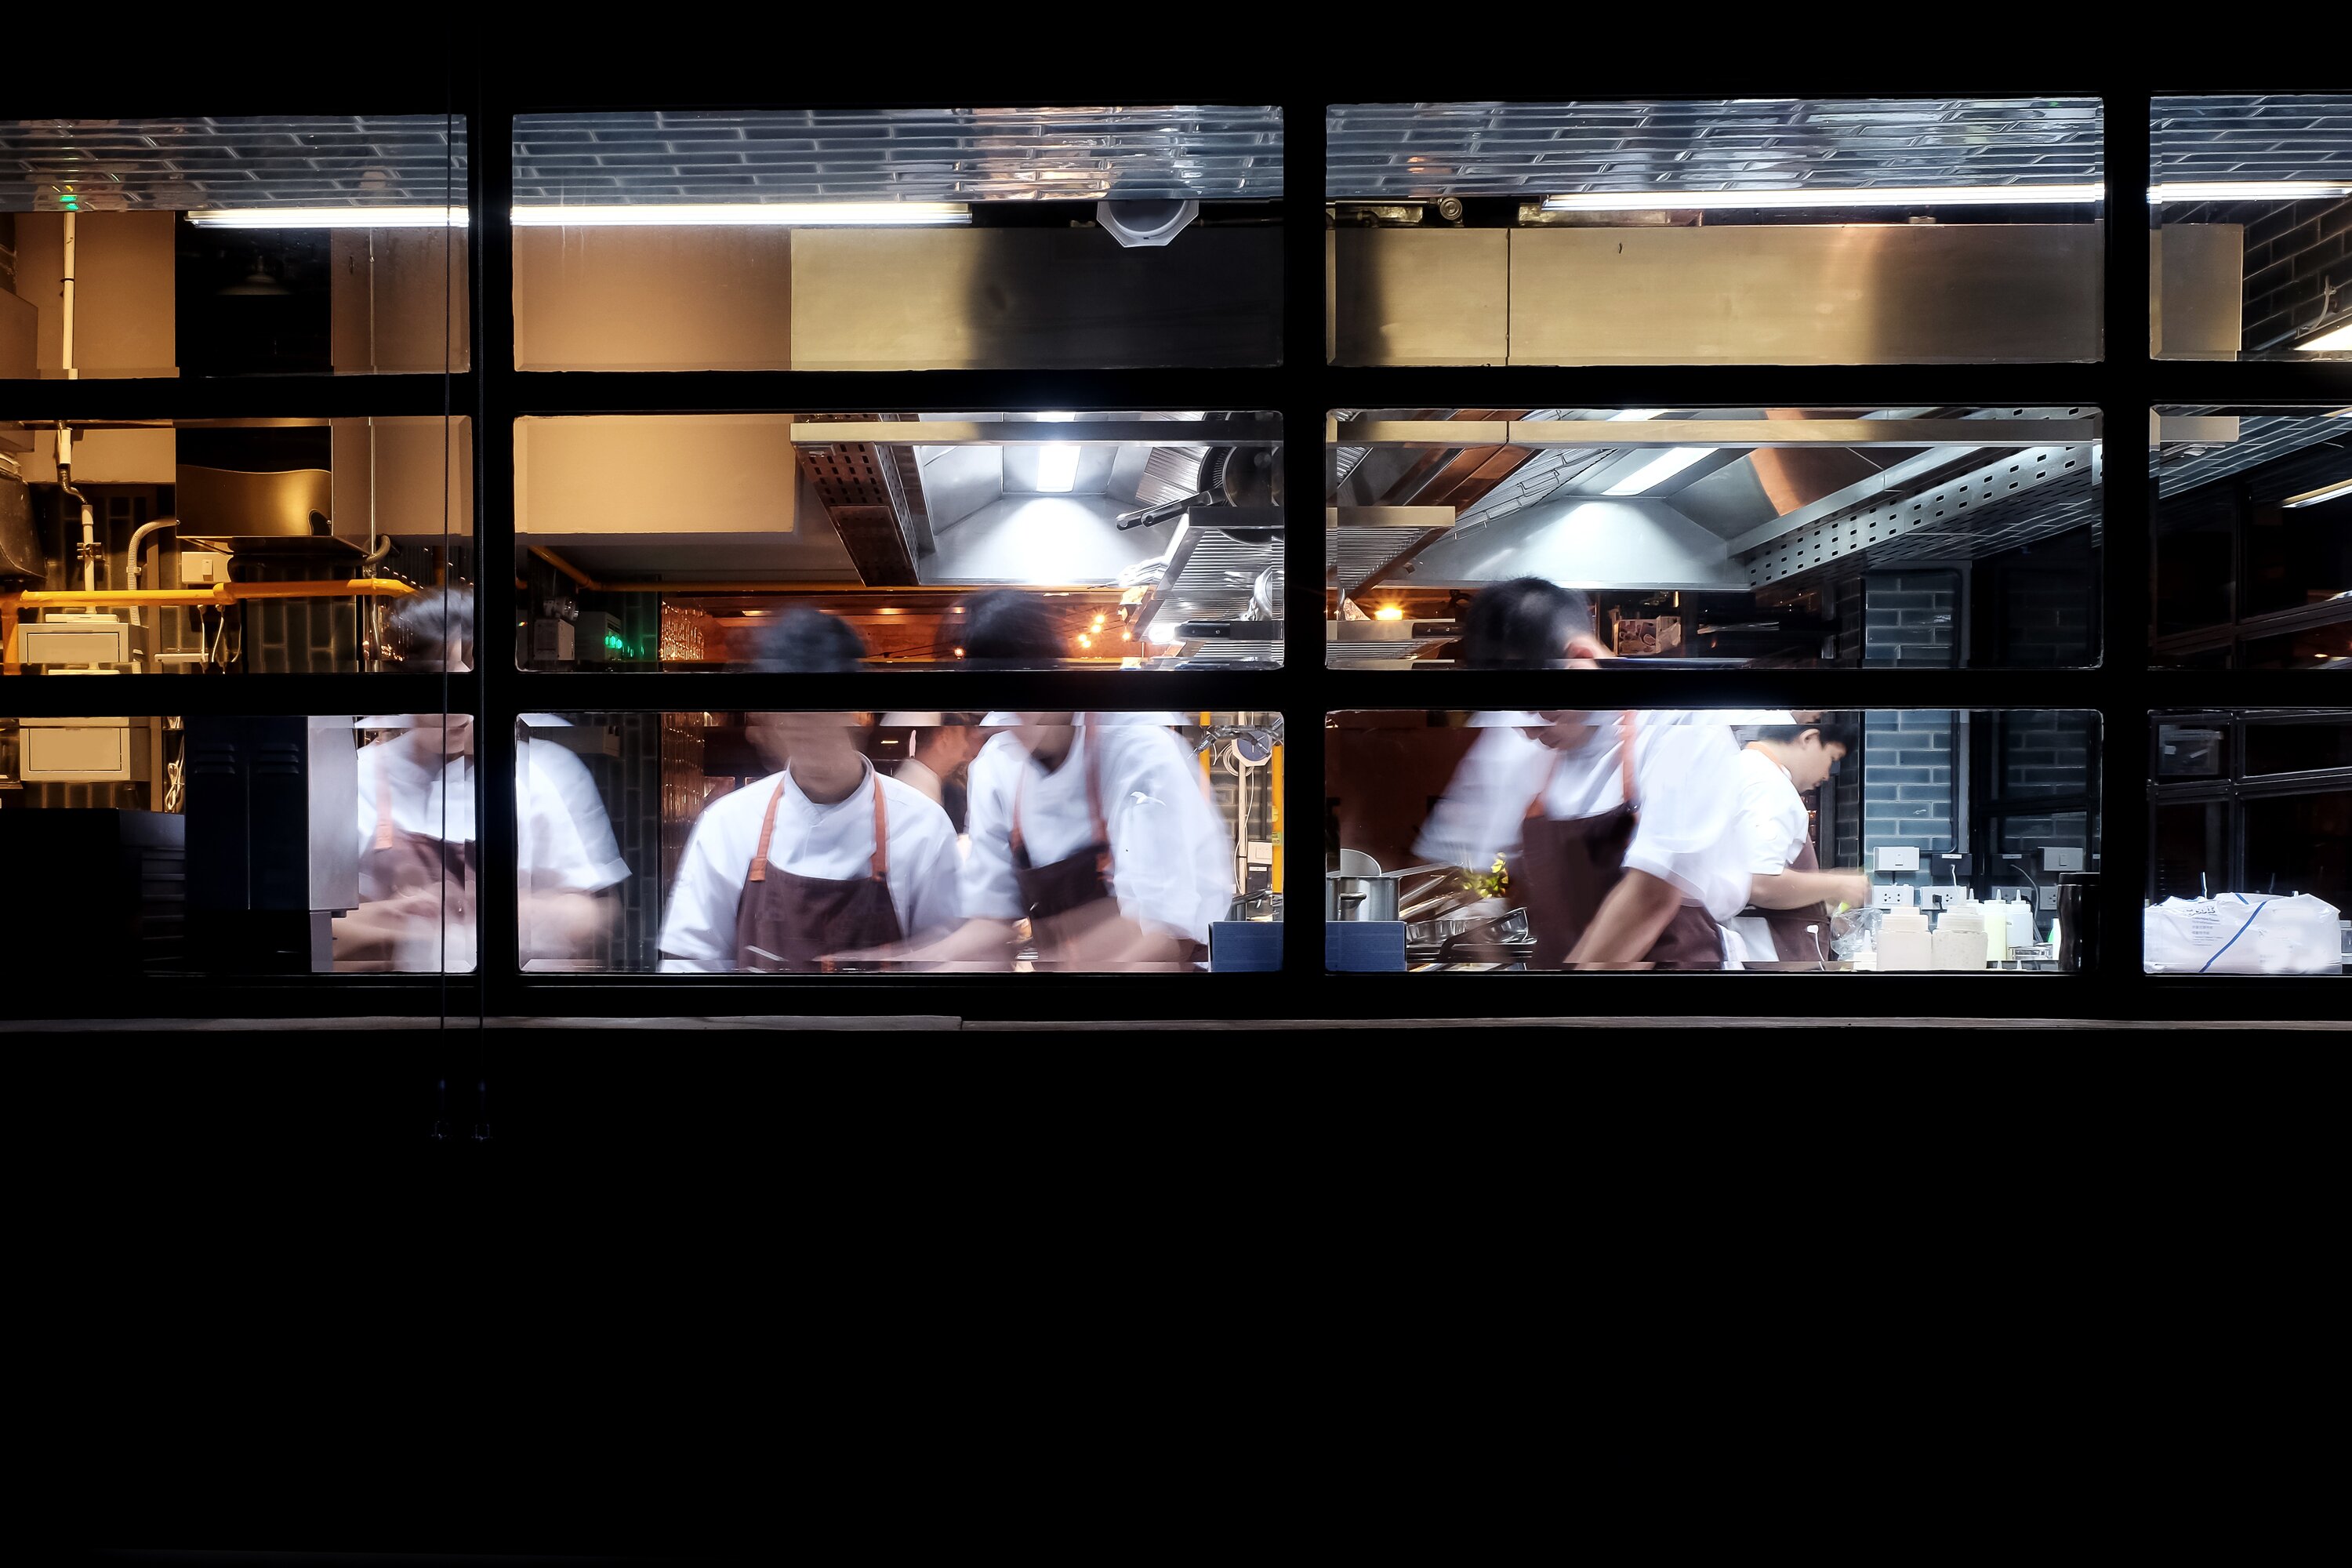 Give chefs the chance to express their skills for happier workplace, says new research